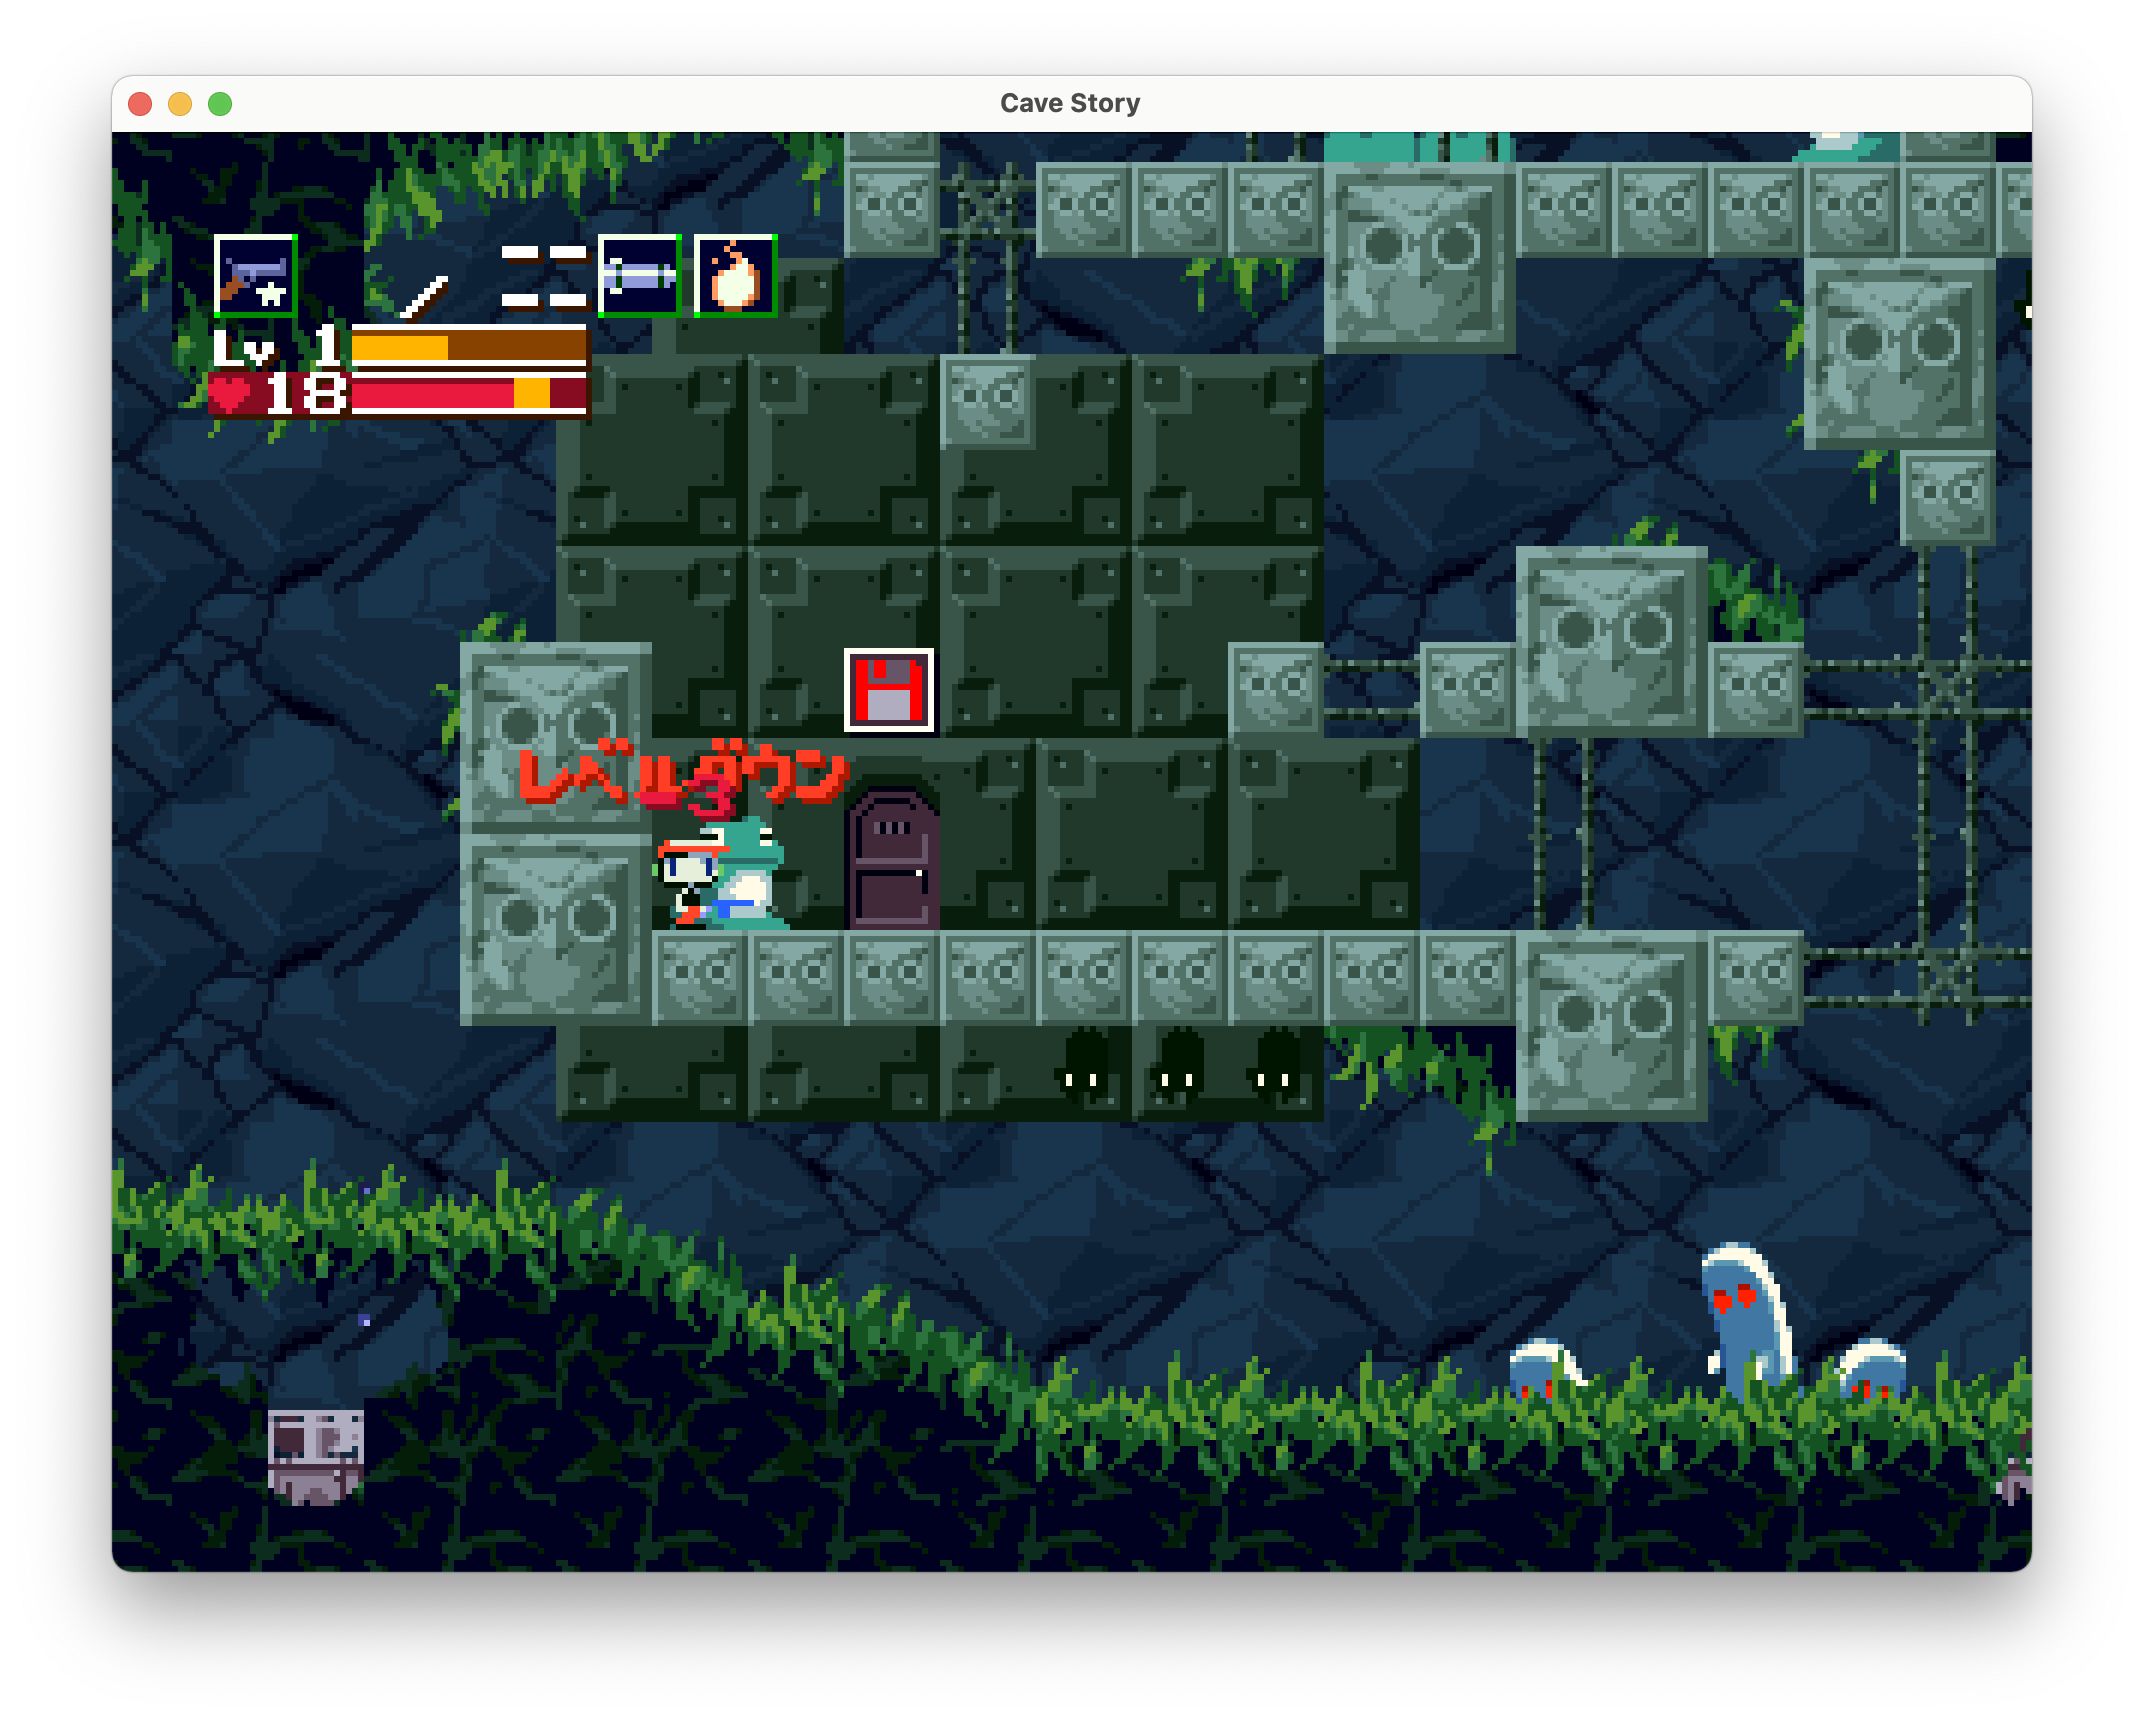 a screenshot of the game Cave Story. A large from is at the same position as the player, and their is red japanese text indicating damage